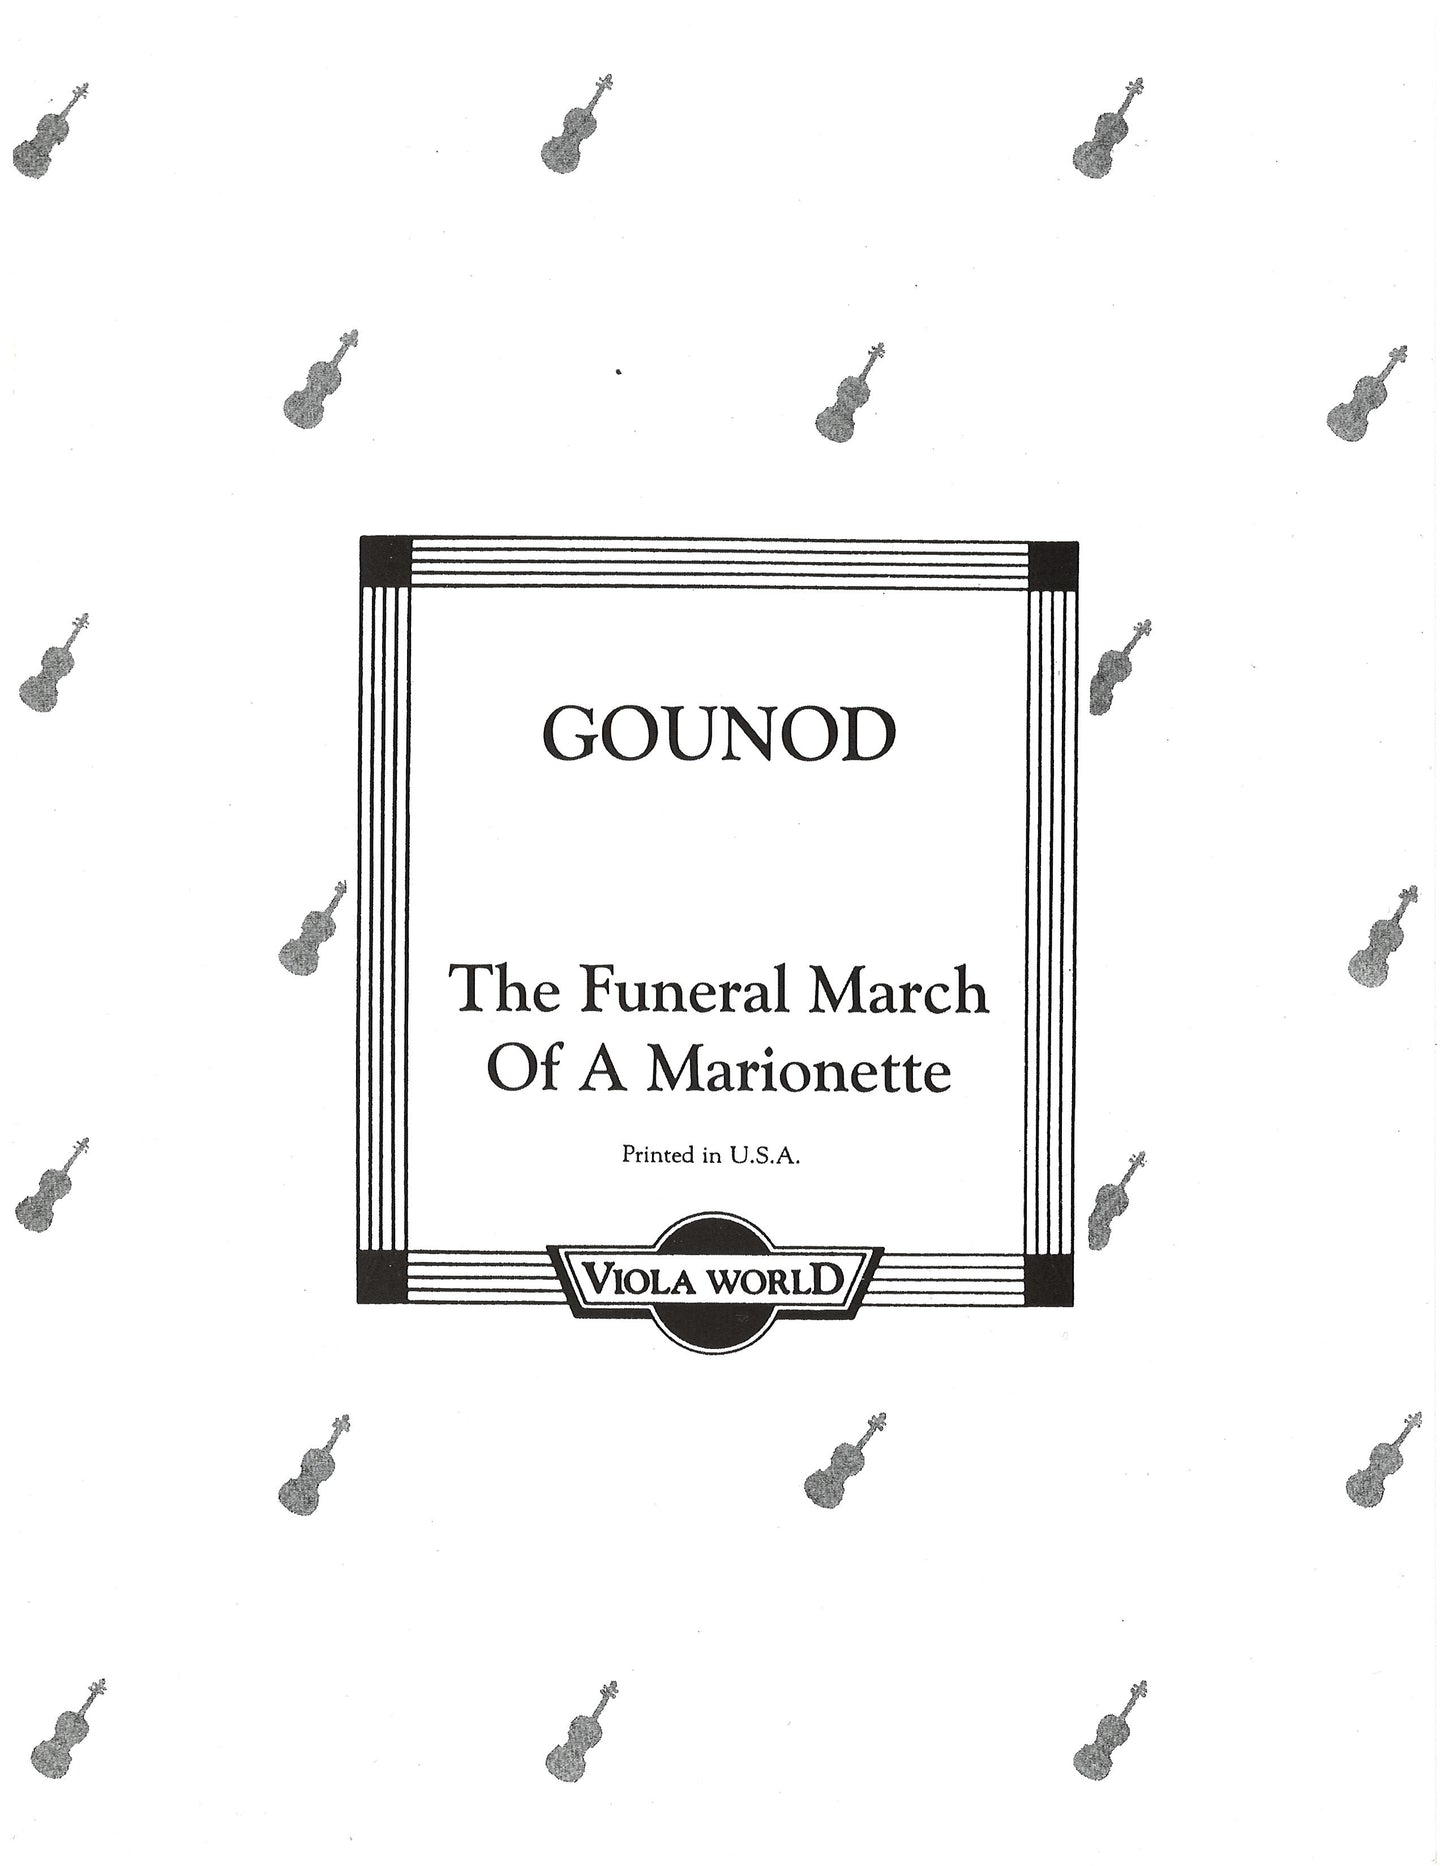 Gounod - Funeral March Of A Marionette